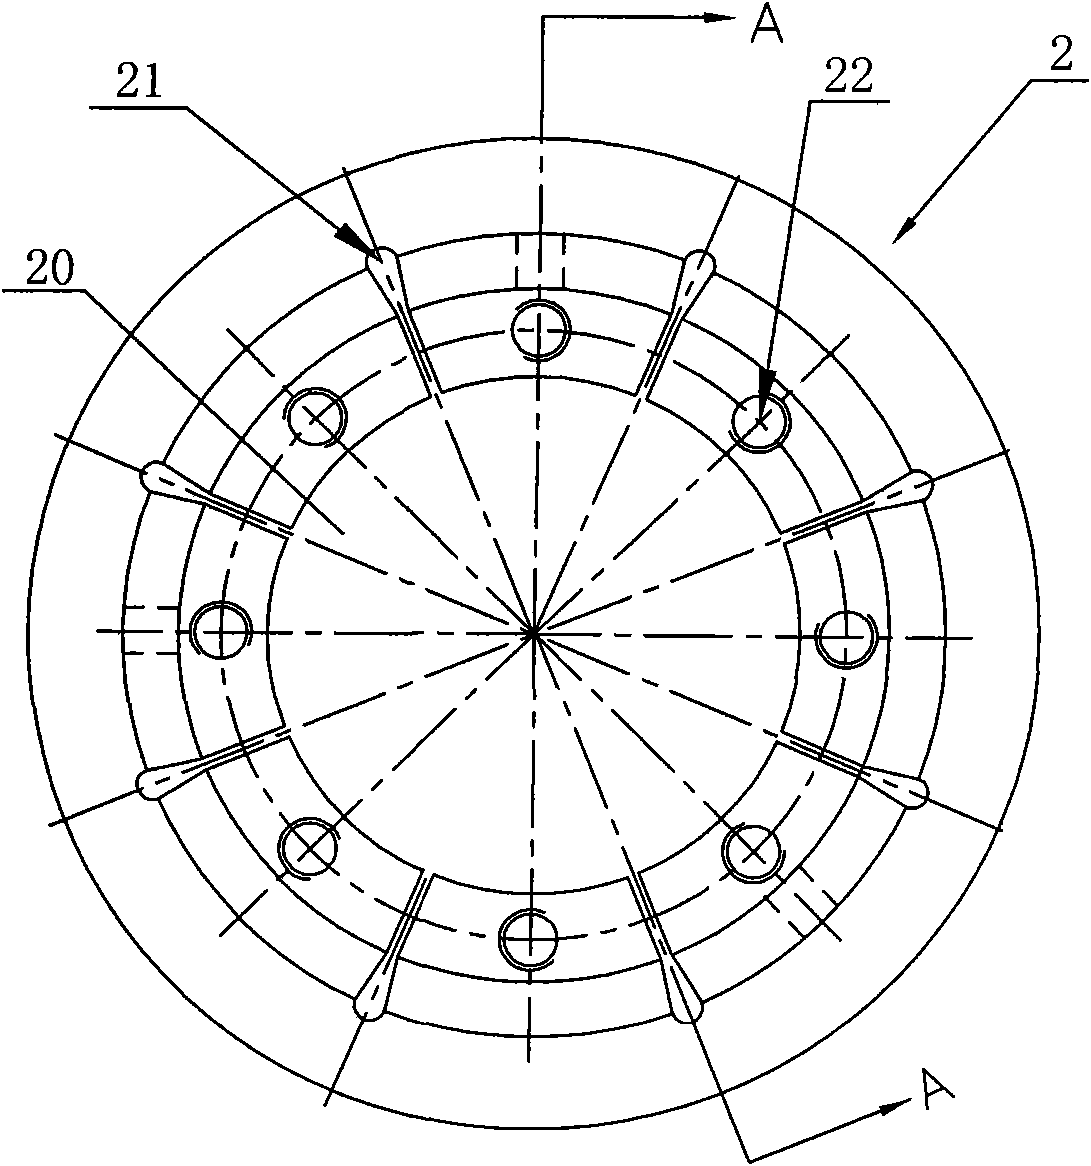 Forming device of diamond tooth-dividing sintered saw bits